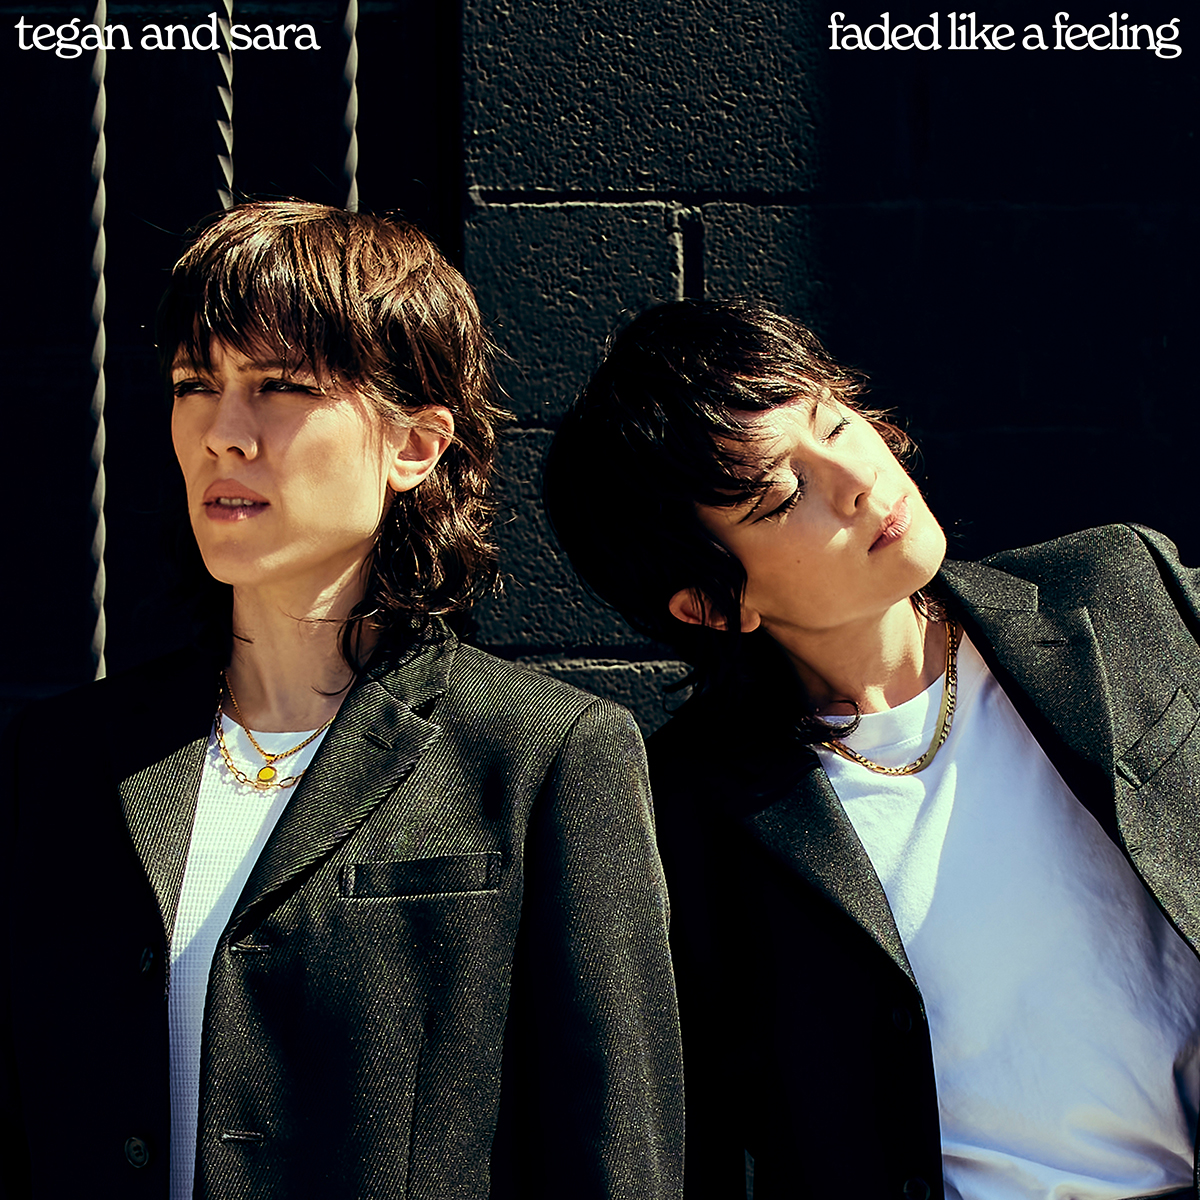 Tegan And Sara Share “Faded Like A Feeling” Single & Video Off New Album Crybaby, Due October 21